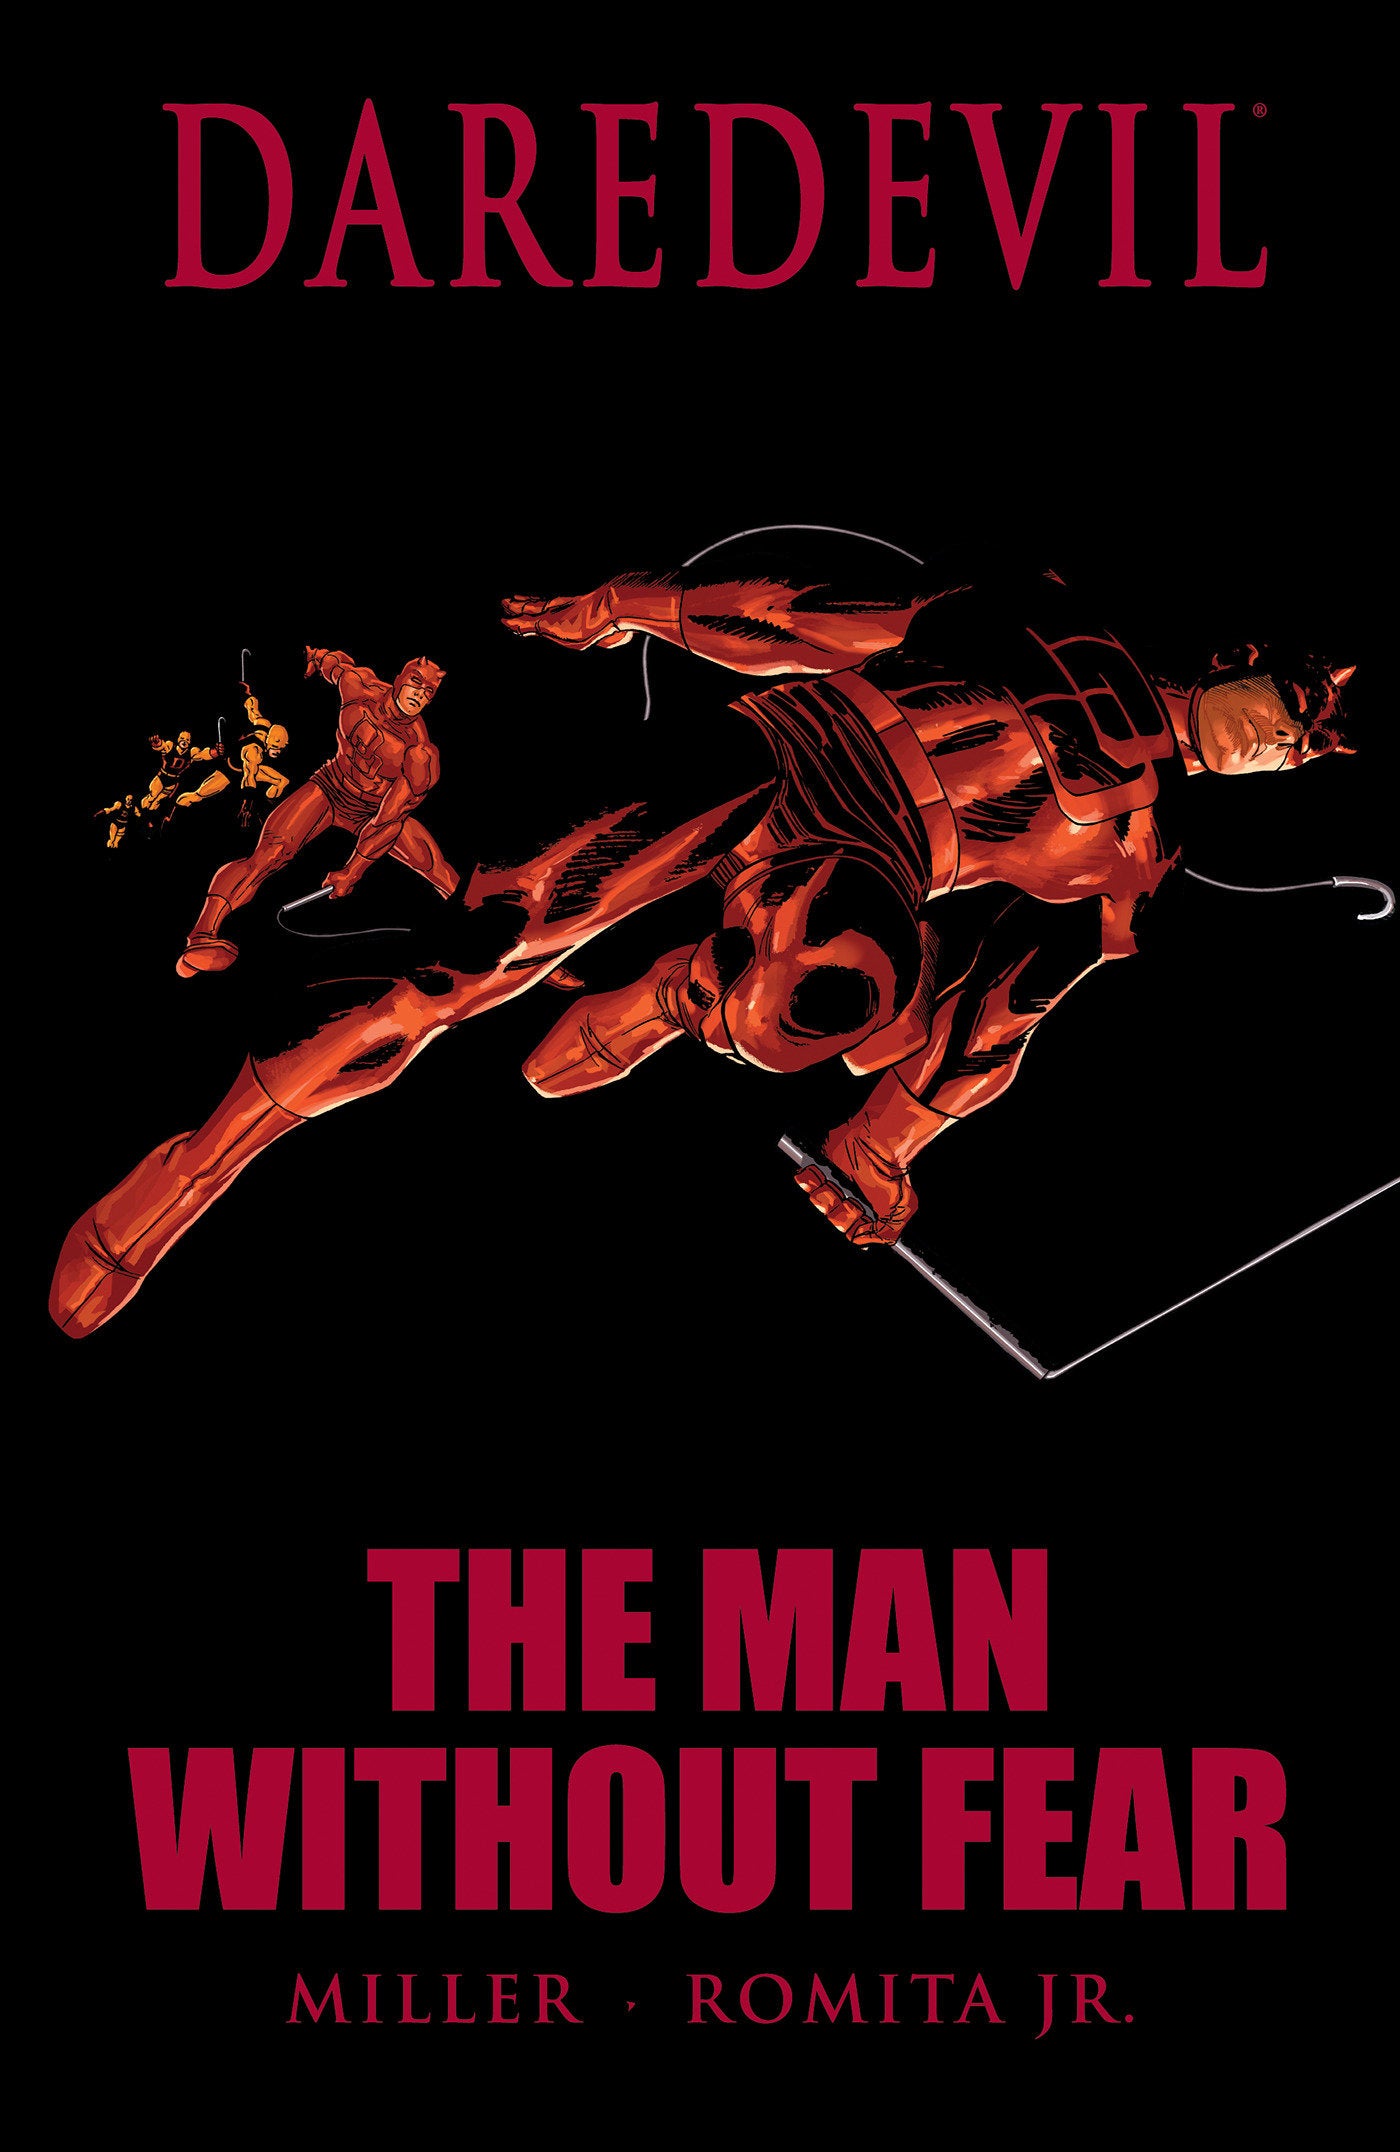 DAREDEVIL: THE MAN WITHOUT FEAR TRADE PAPERBACK